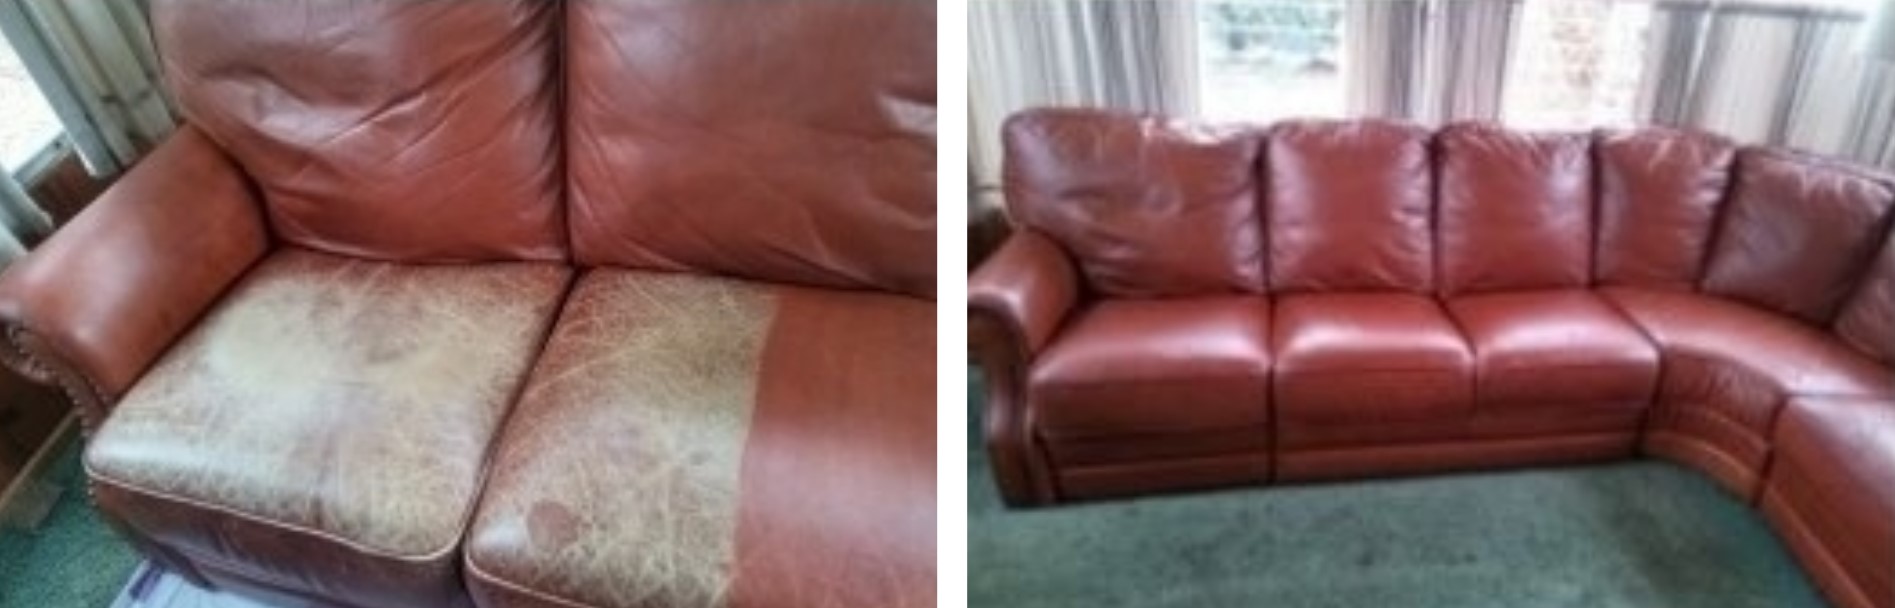 How To Repair Dog Chew Hole in Vinyl or Leather Furniture